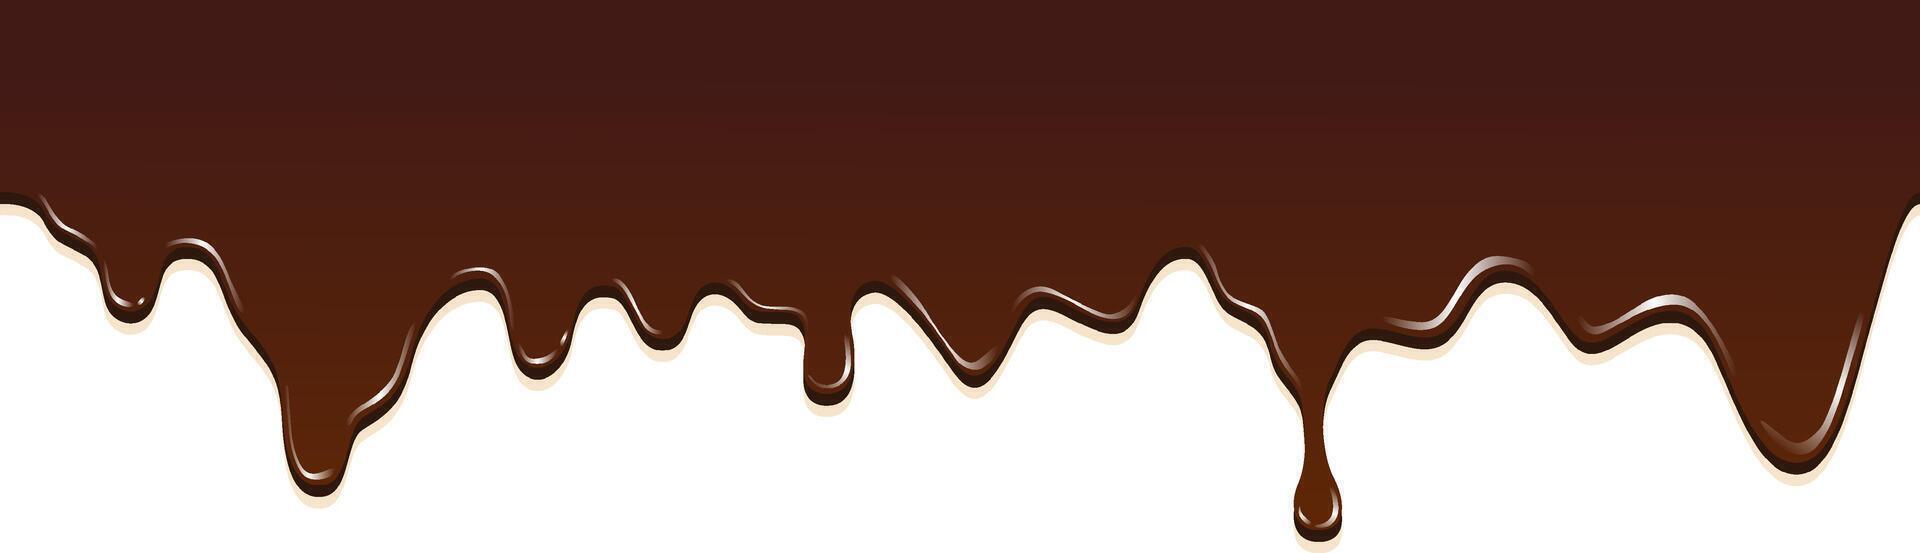 Realistic dripping brown chocolate illustration isolated in white background. World Chocolate Day celebration element. vector